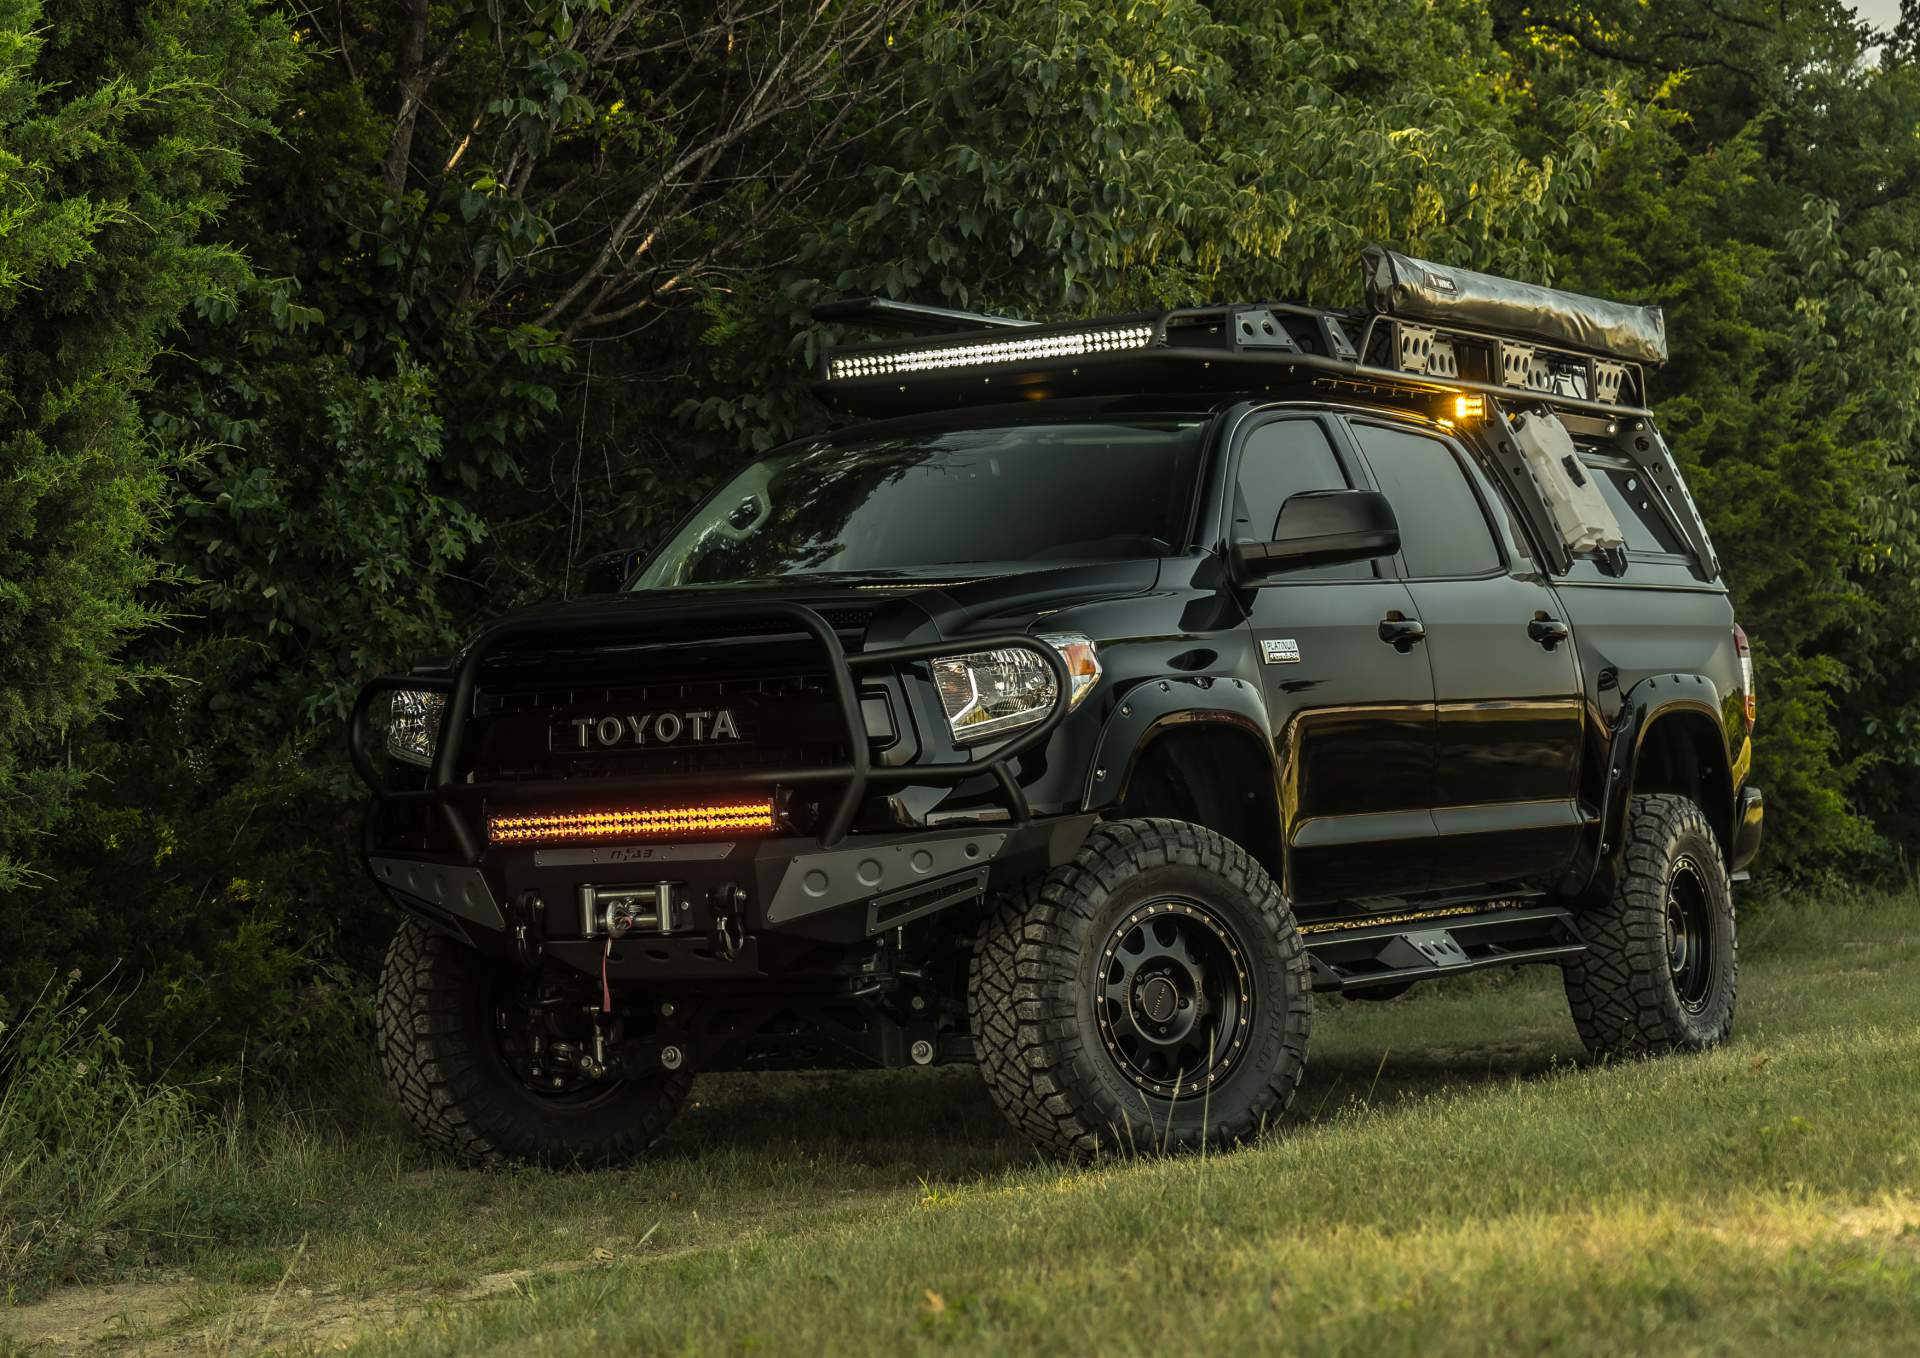 999 Awesome 2018 toyota tundra sr5 price for Collection